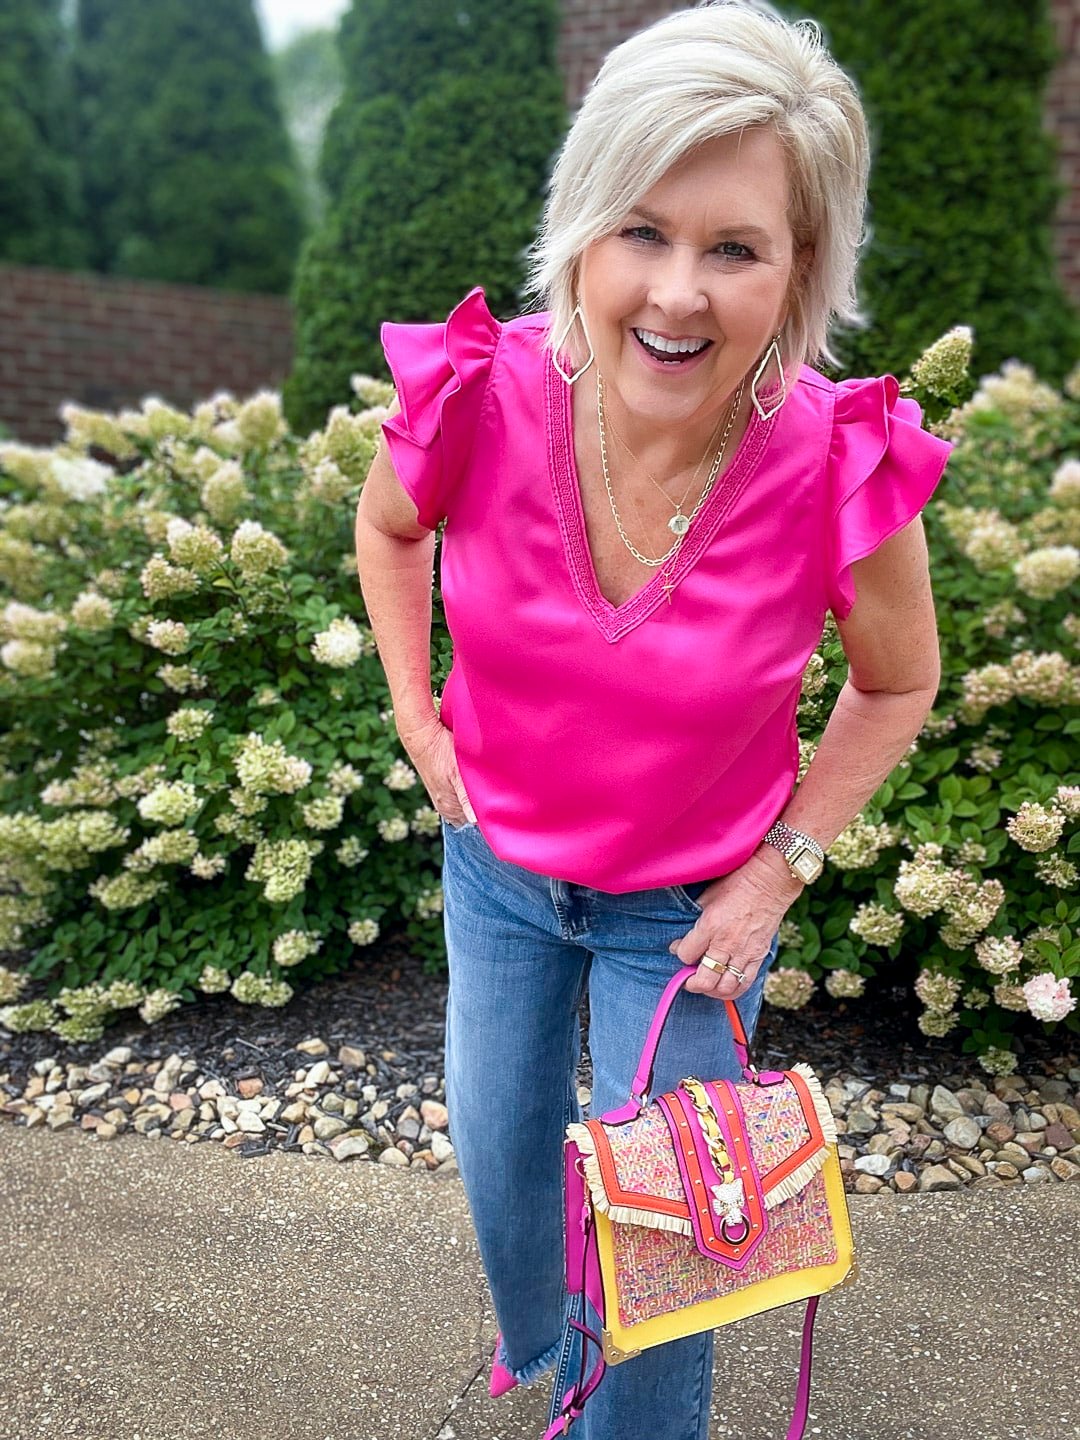 Over 40 Fashion Blogger, Tania Stephens is styling wide leg jeans with a pink ruffled top21